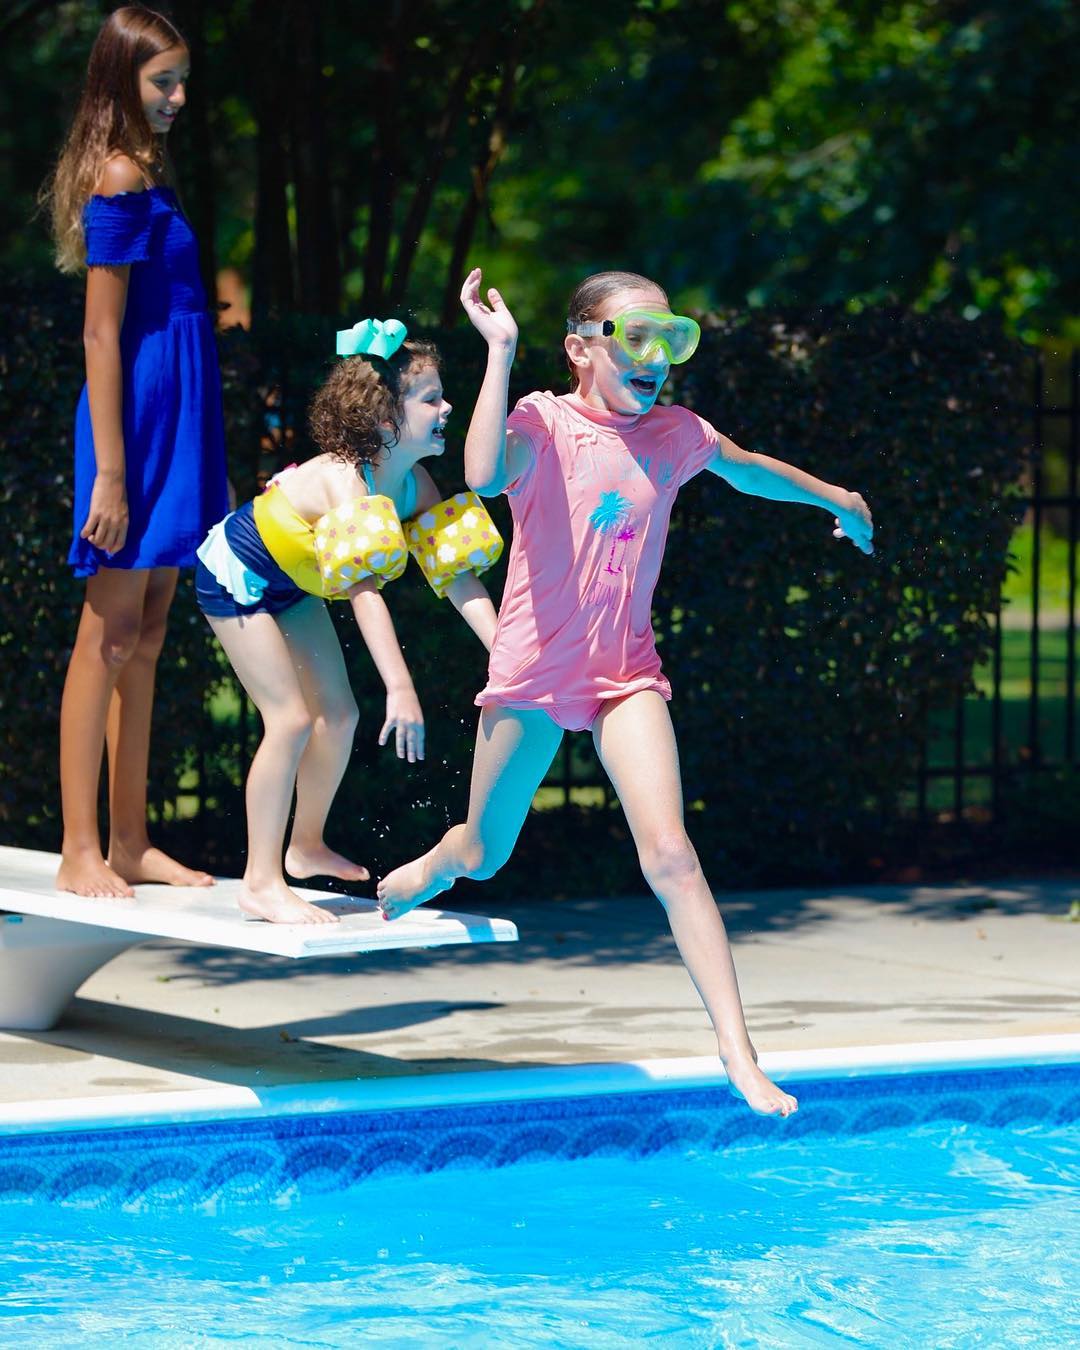 I guess Rosebud not only thinks this is here birthday party…but her diving board? Poor Maggie! #camerapapa #canon #5dmkiv